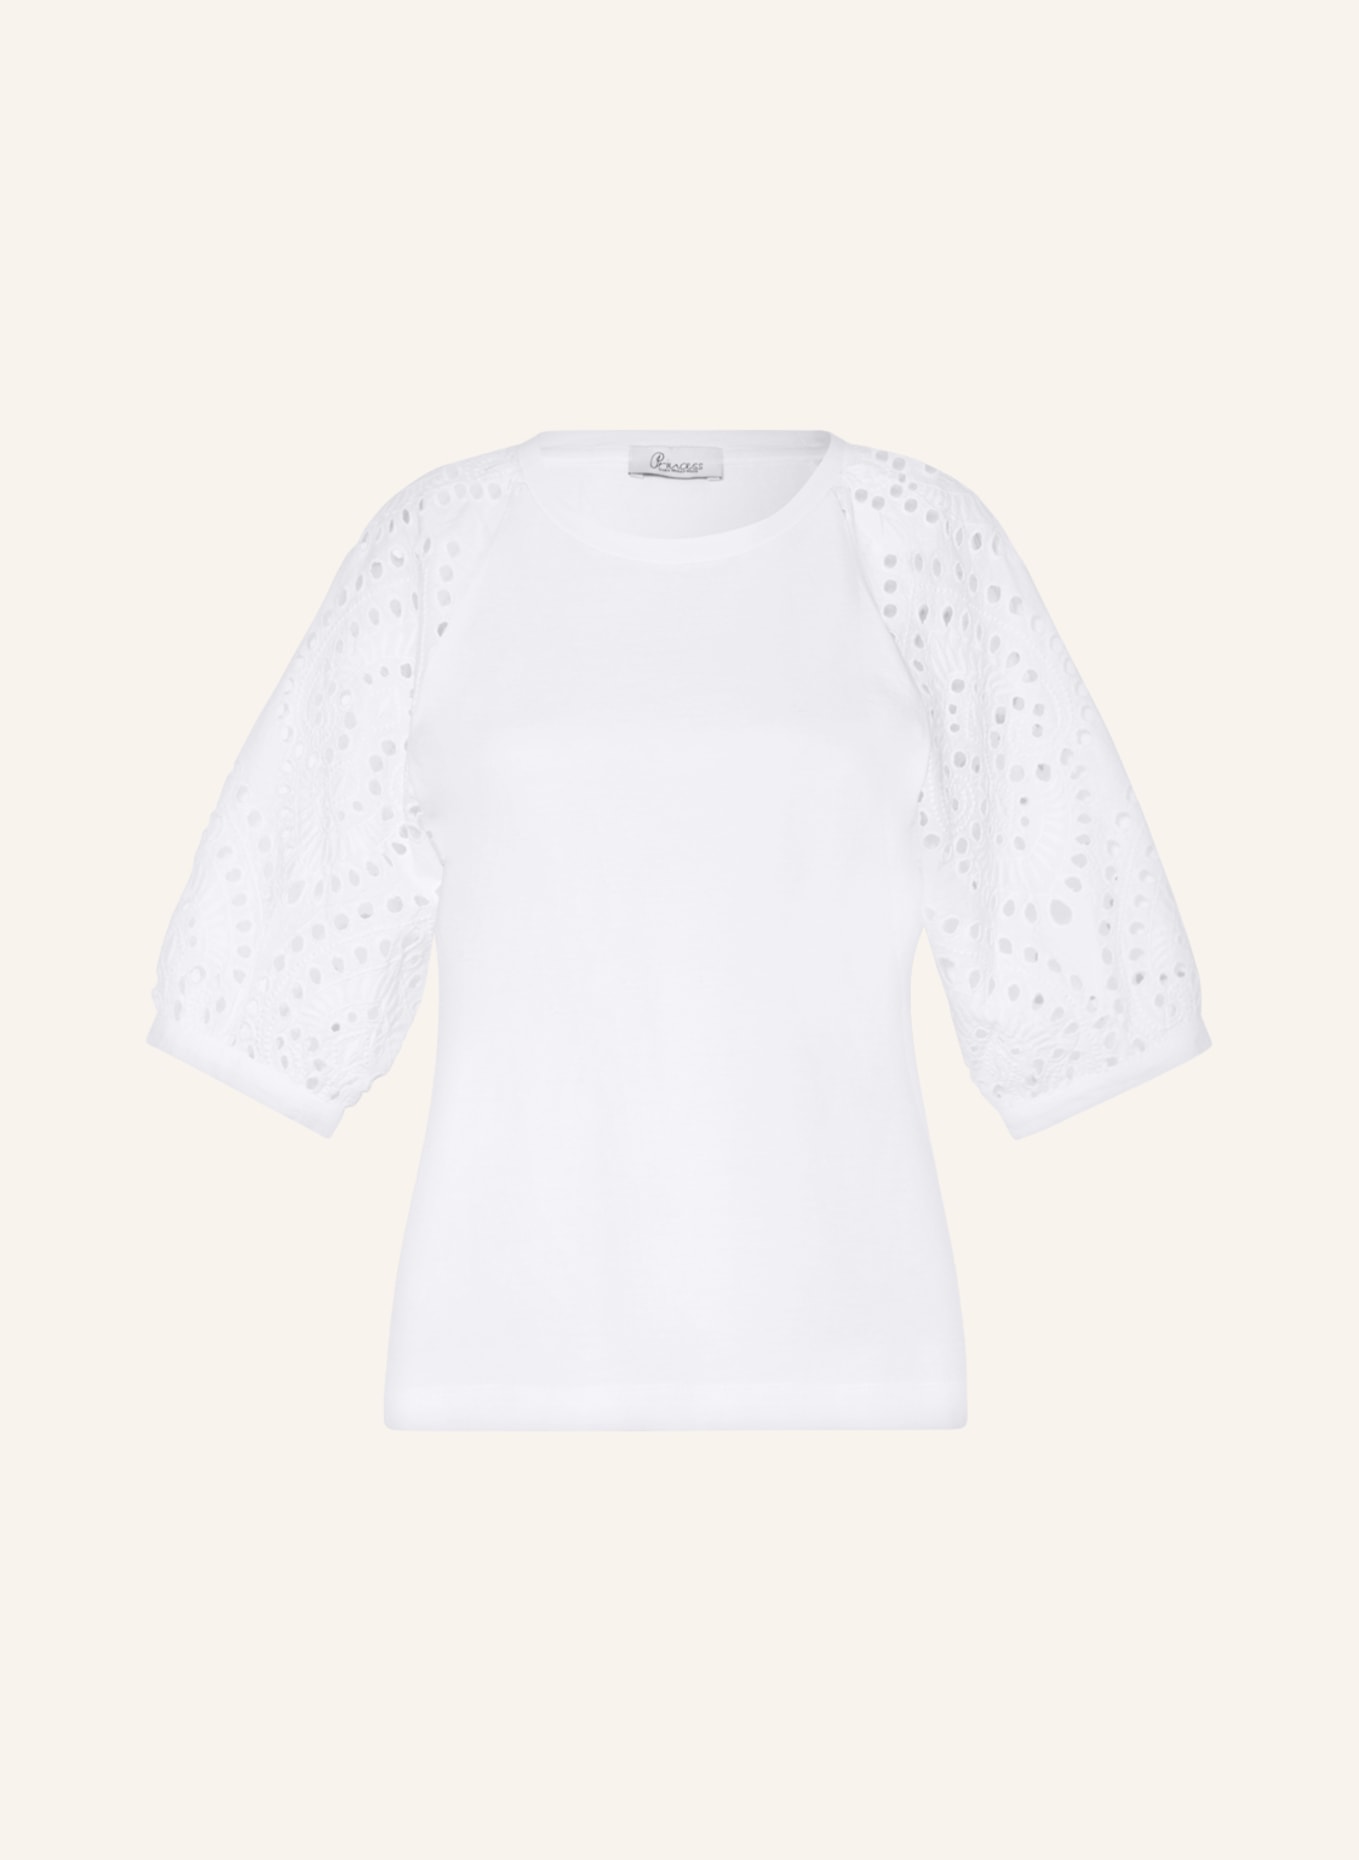 Princess GOES HOLLYWOOD T-shirt with lace, Color: WHITE (Image 1)